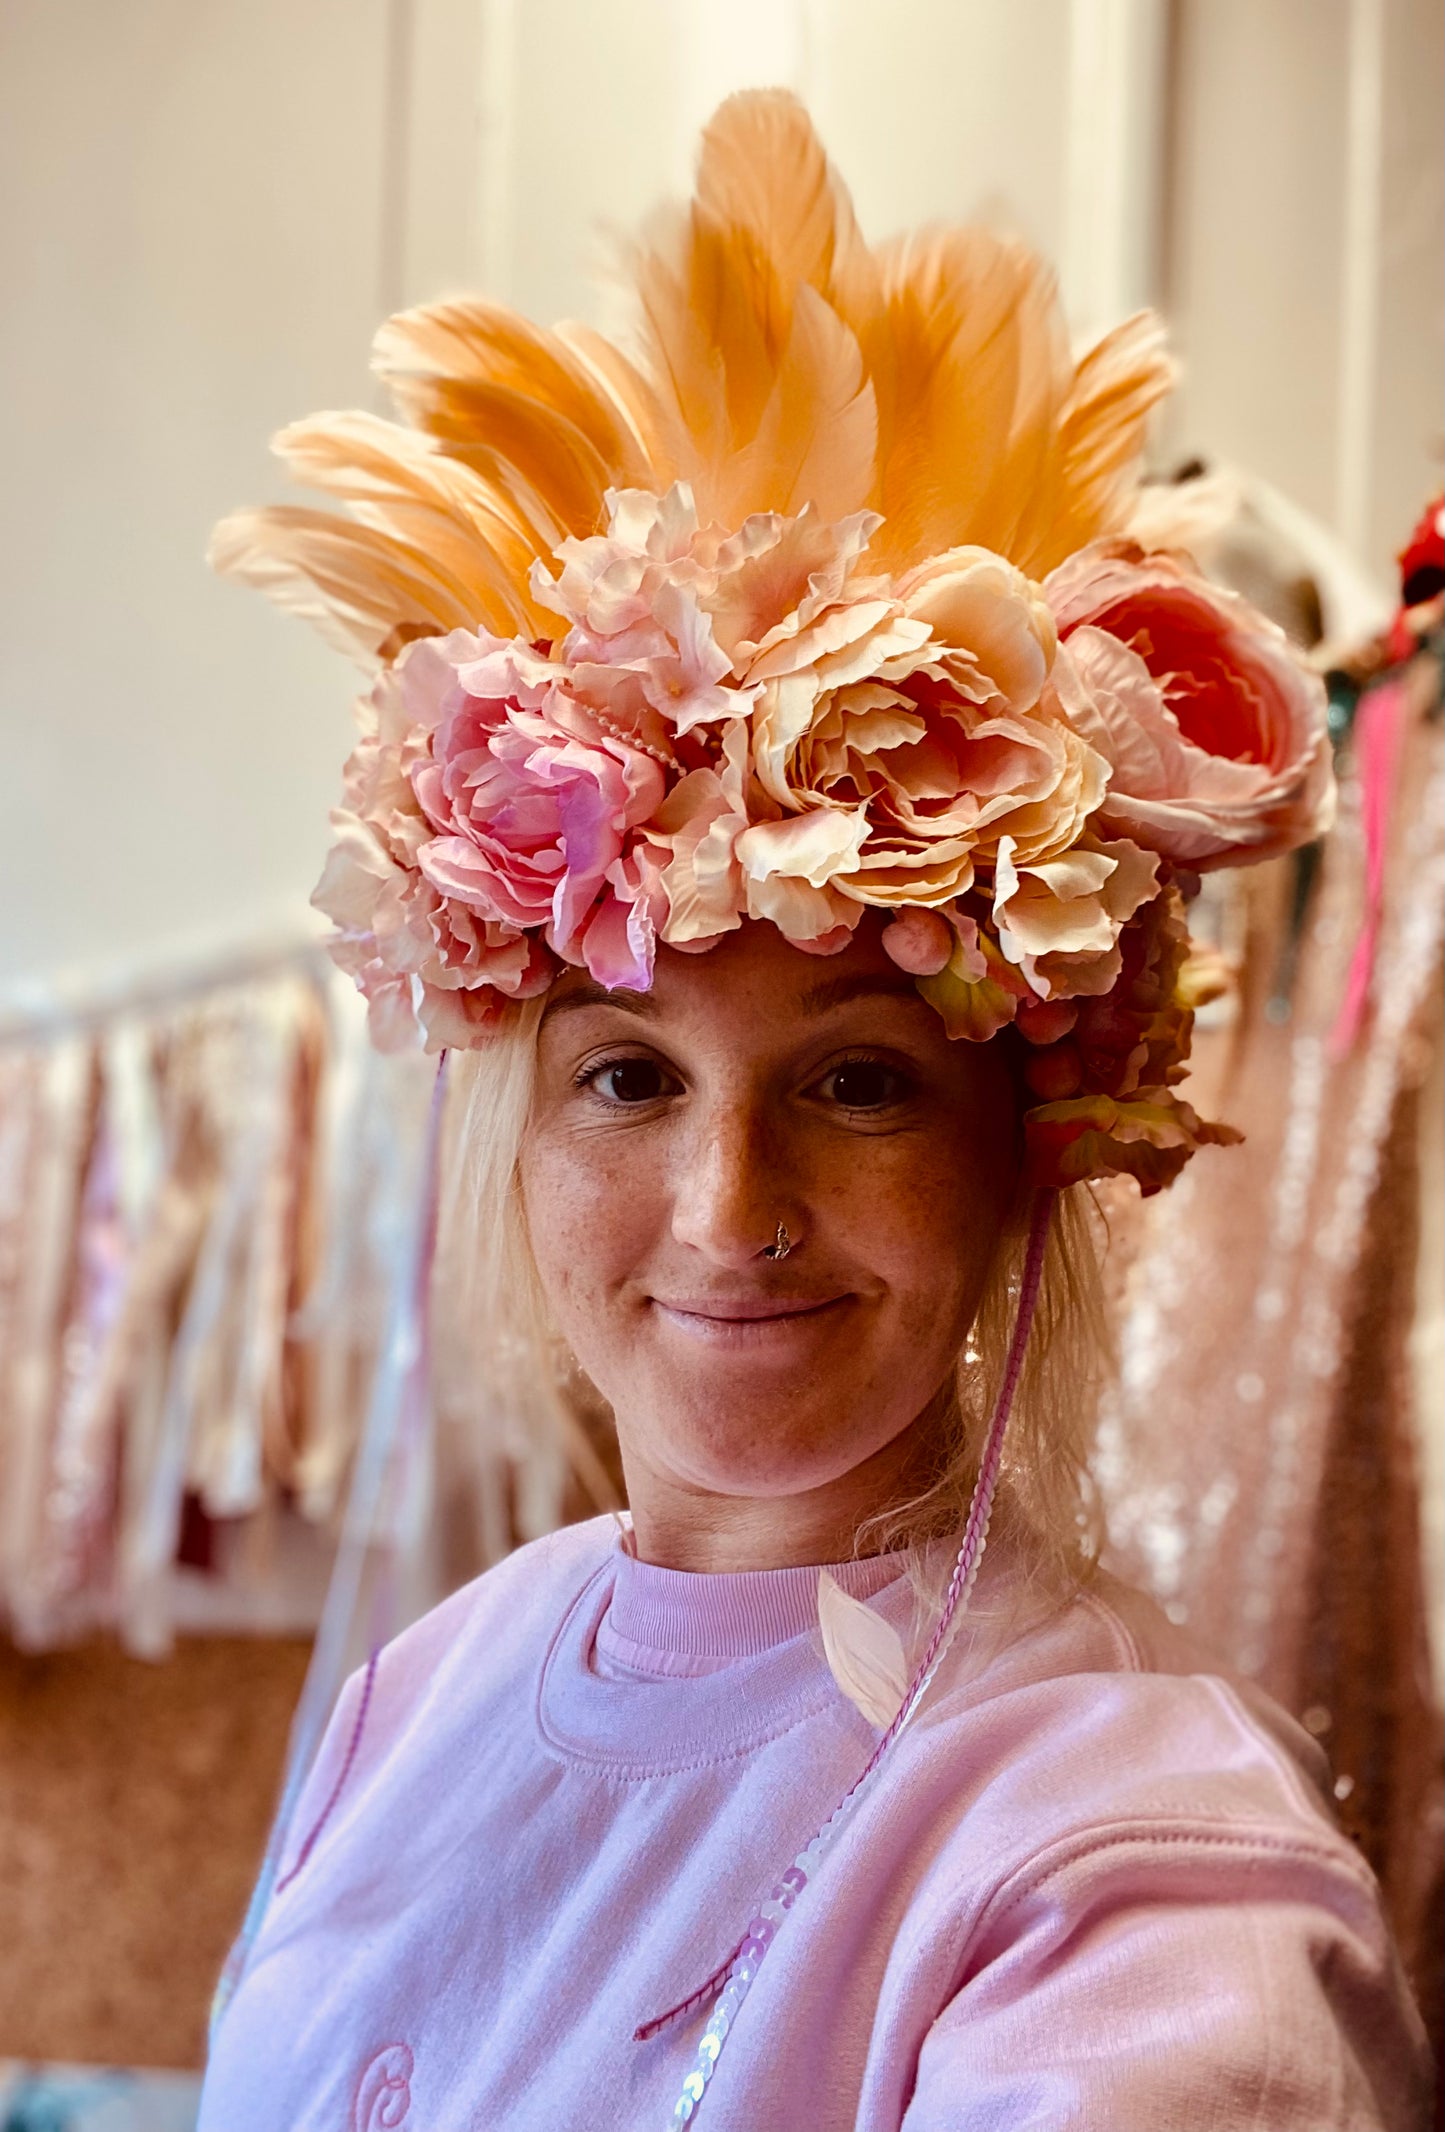 Peach deluxe with flowers headdress